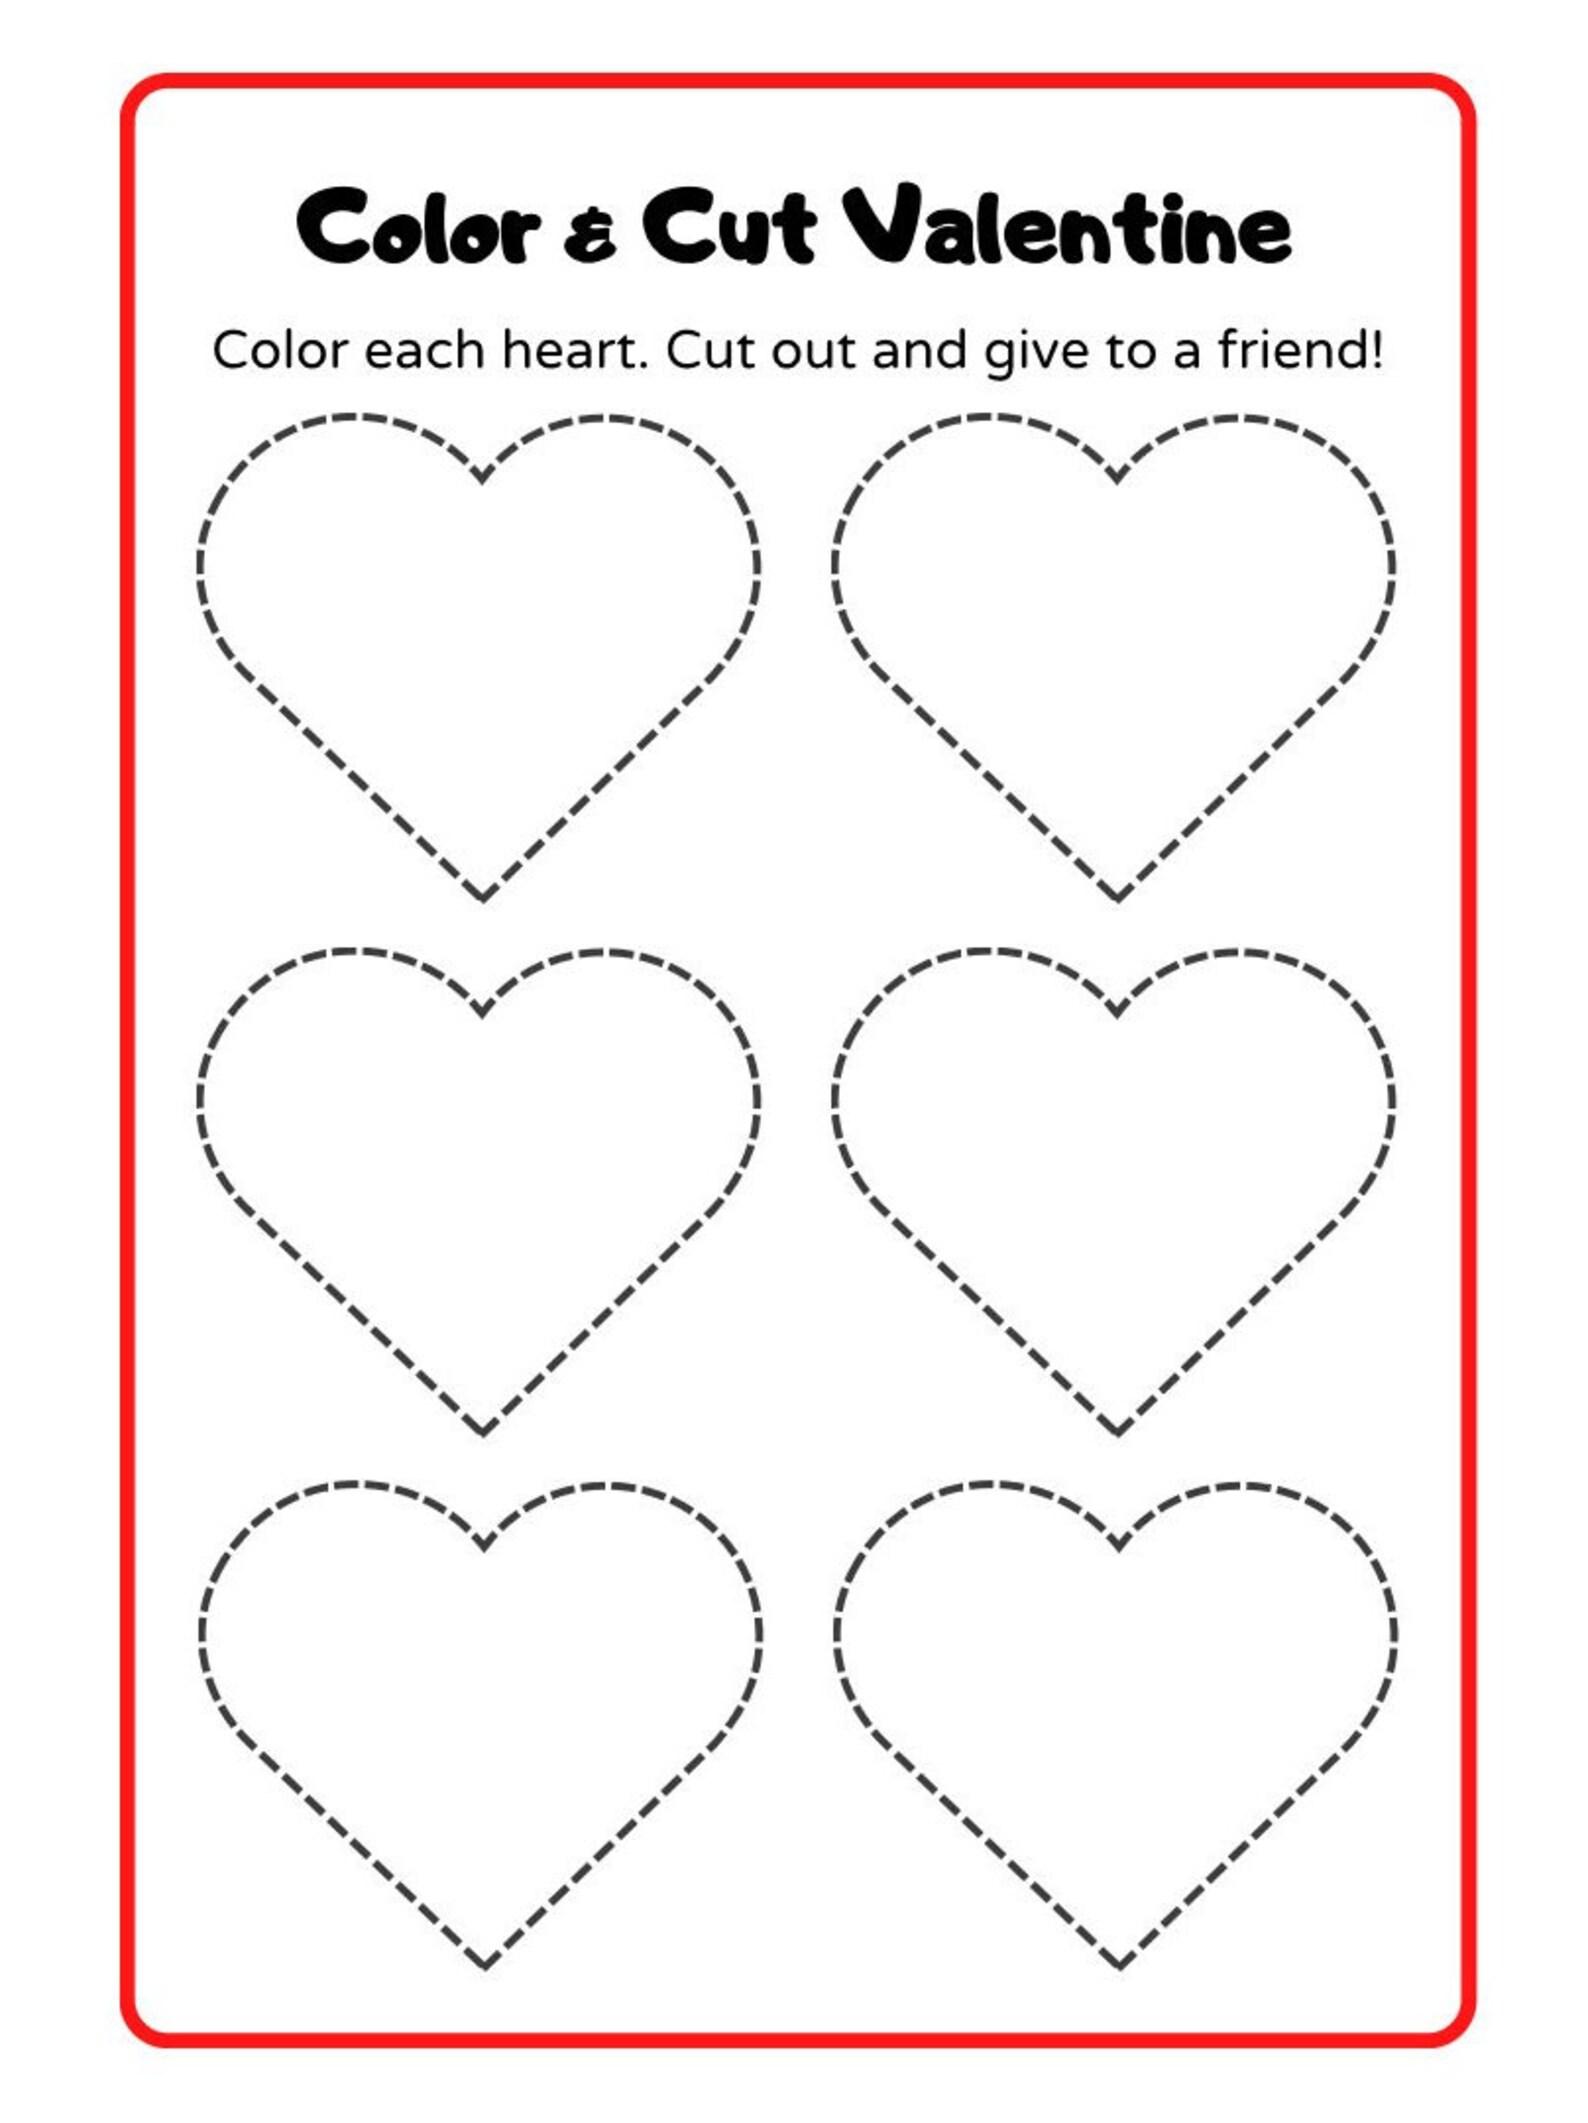 Printable Valentines Worksheets, Coloring, Trace Sheets ,and Adding and ...